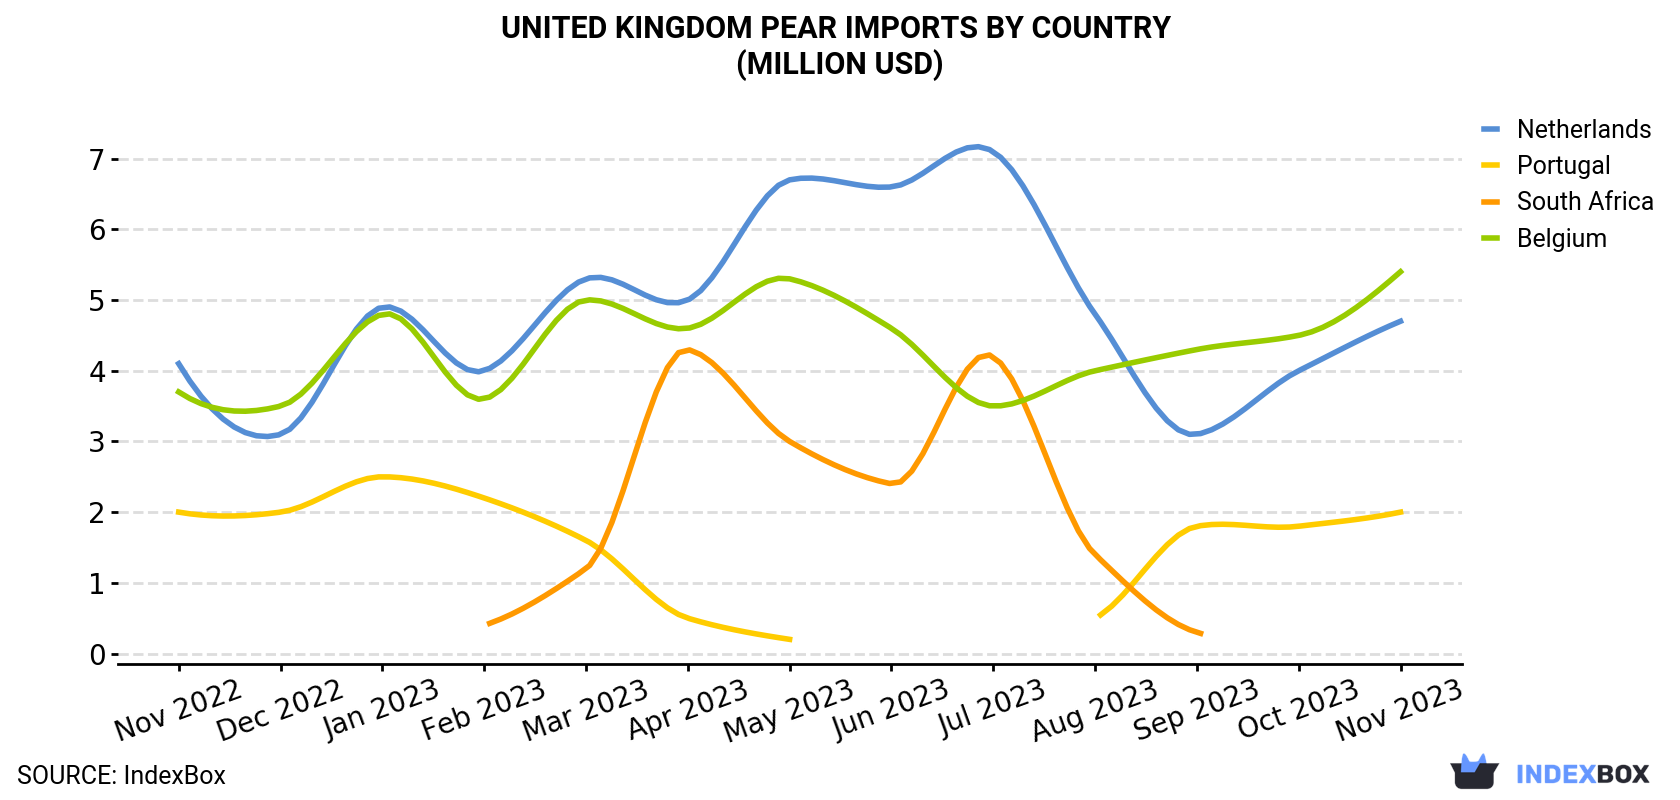 United Kingdom Pear Imports By Country (Million USD)